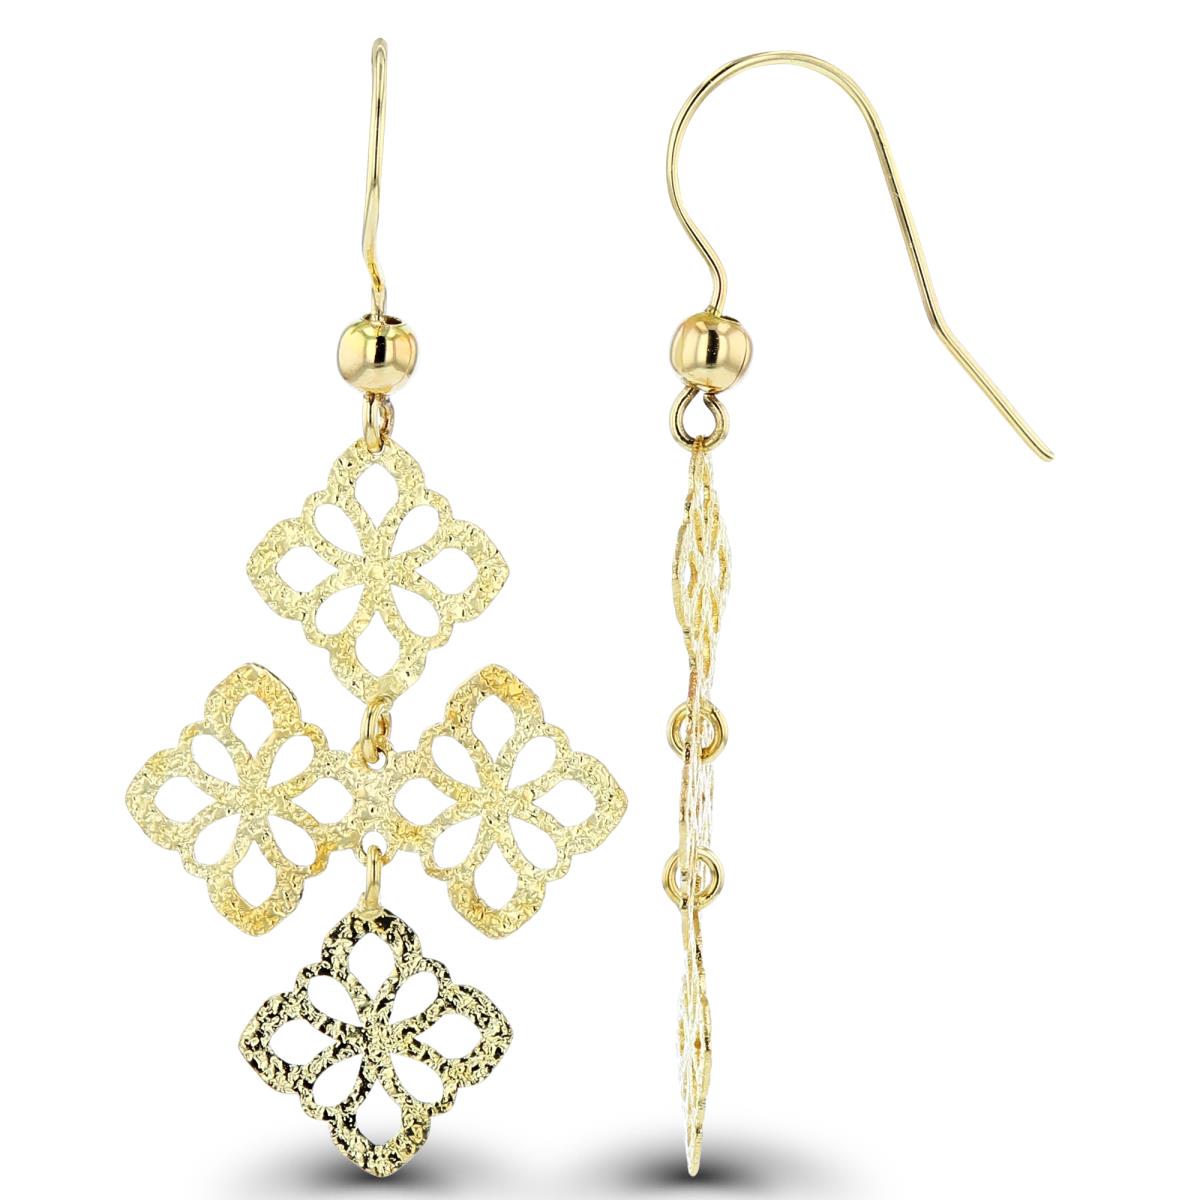 14K Yellow Gold Textured Ornament Cross Dangling Earrings with Fish Hook